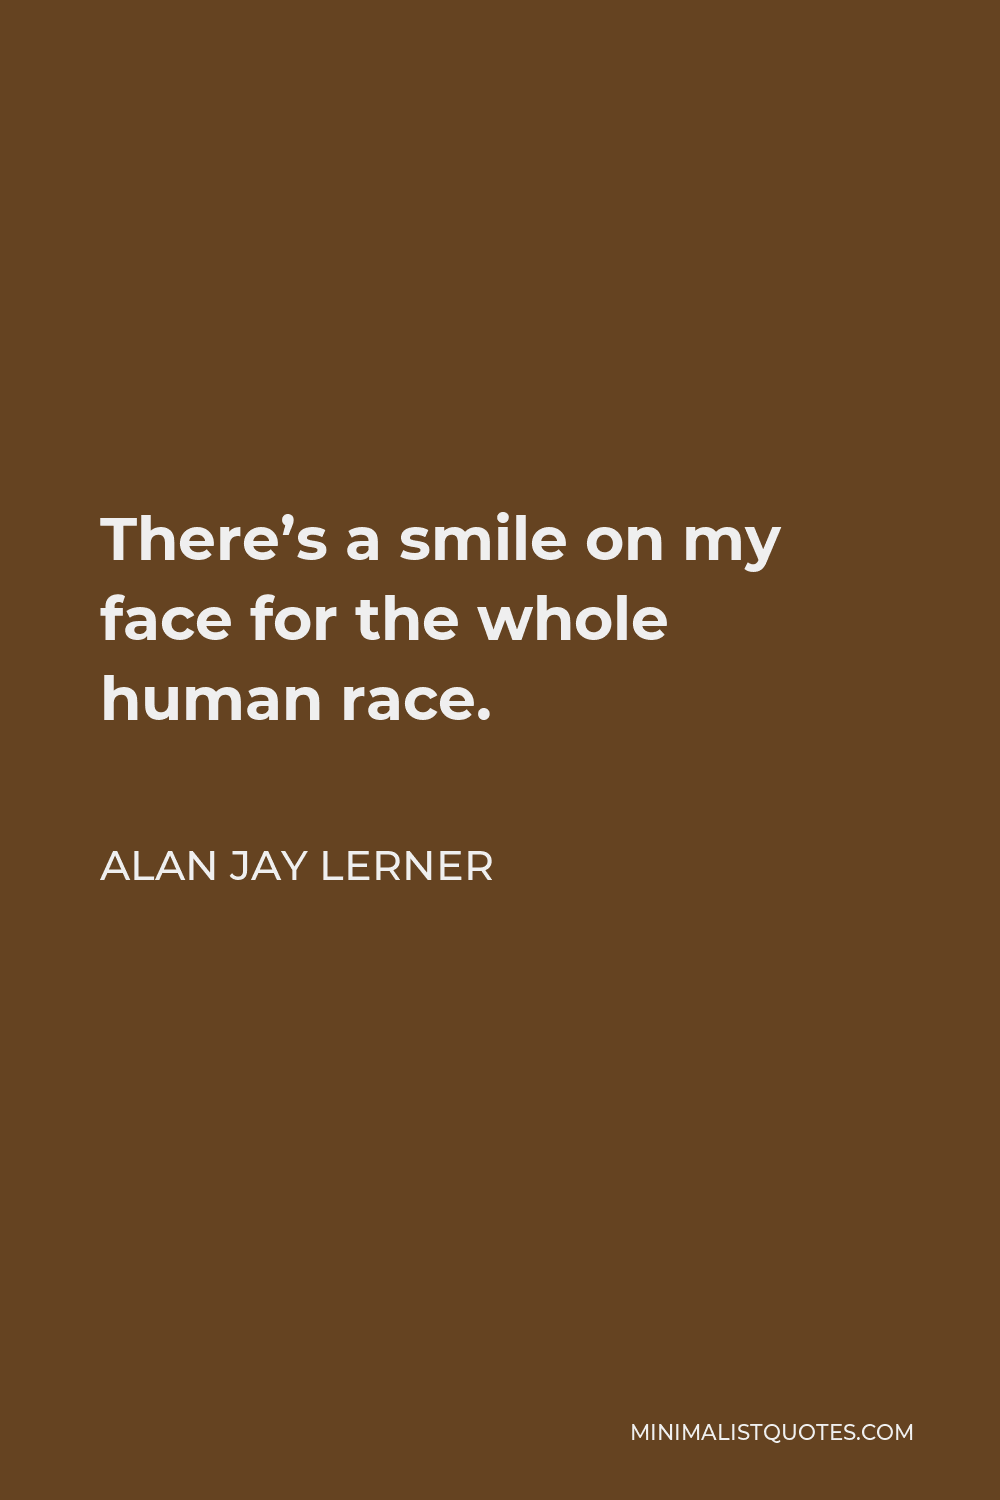 Alan Jay Lerner Quote - There’s a smile on my face for the whole human race.